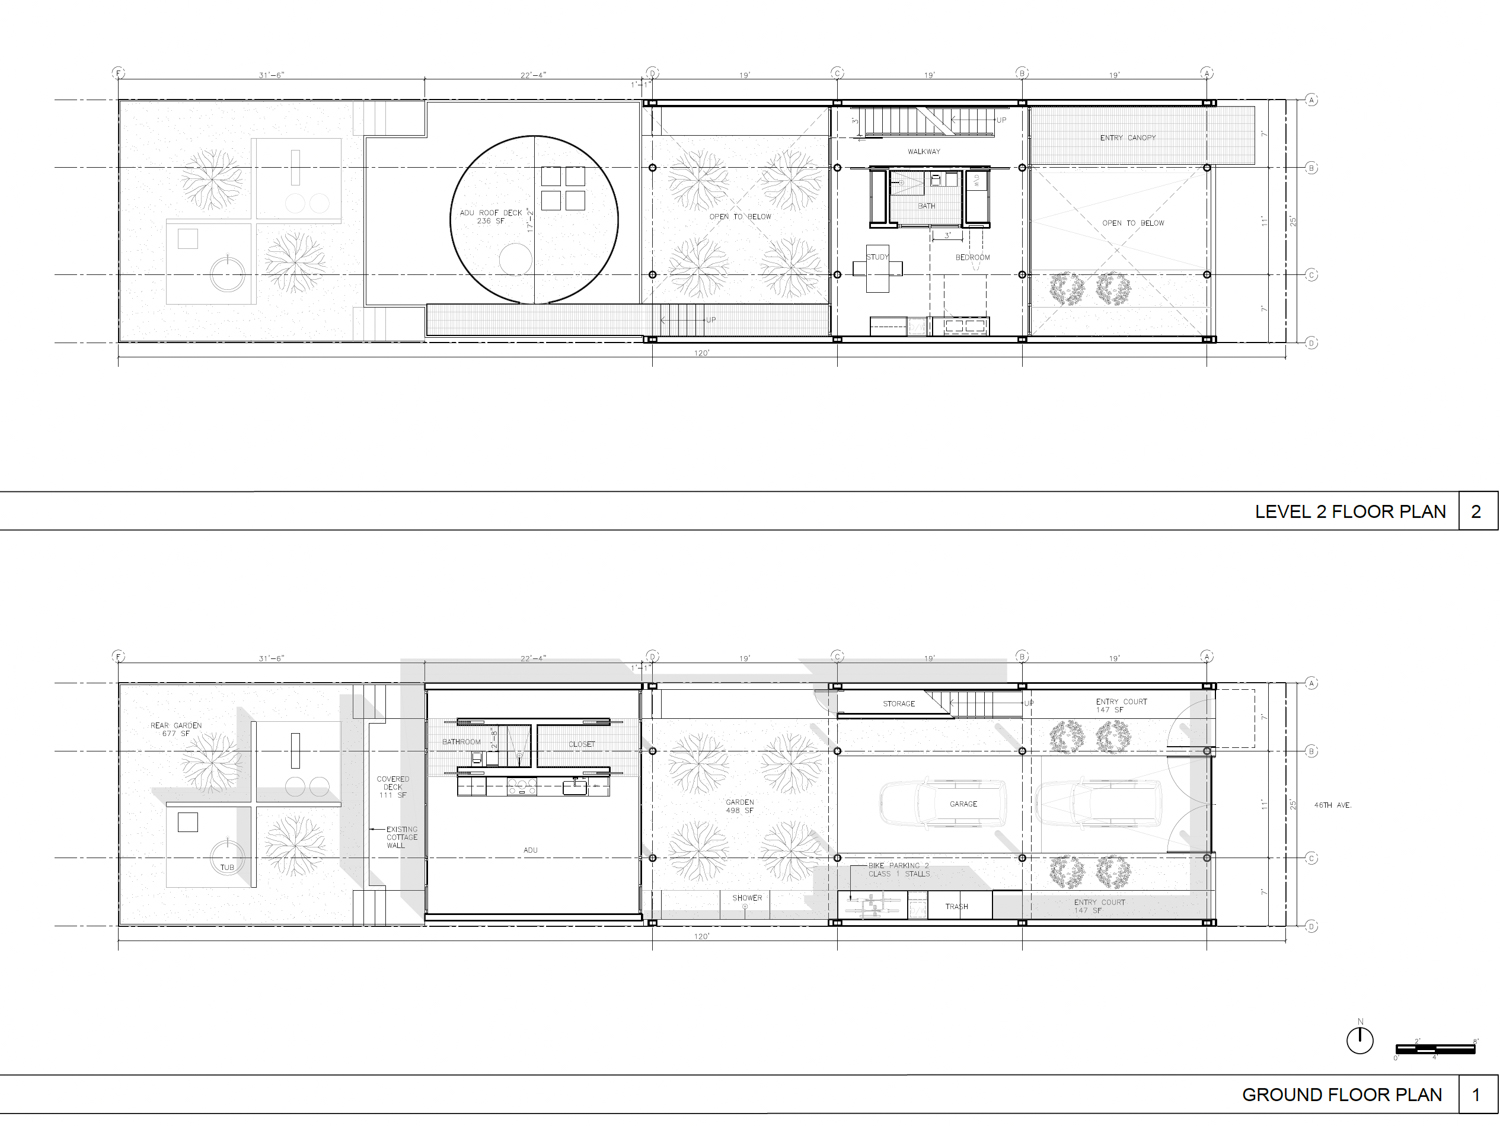 1271 46th Avenue floor plan of ground and second level, design by Stanley Saitowitz Architects